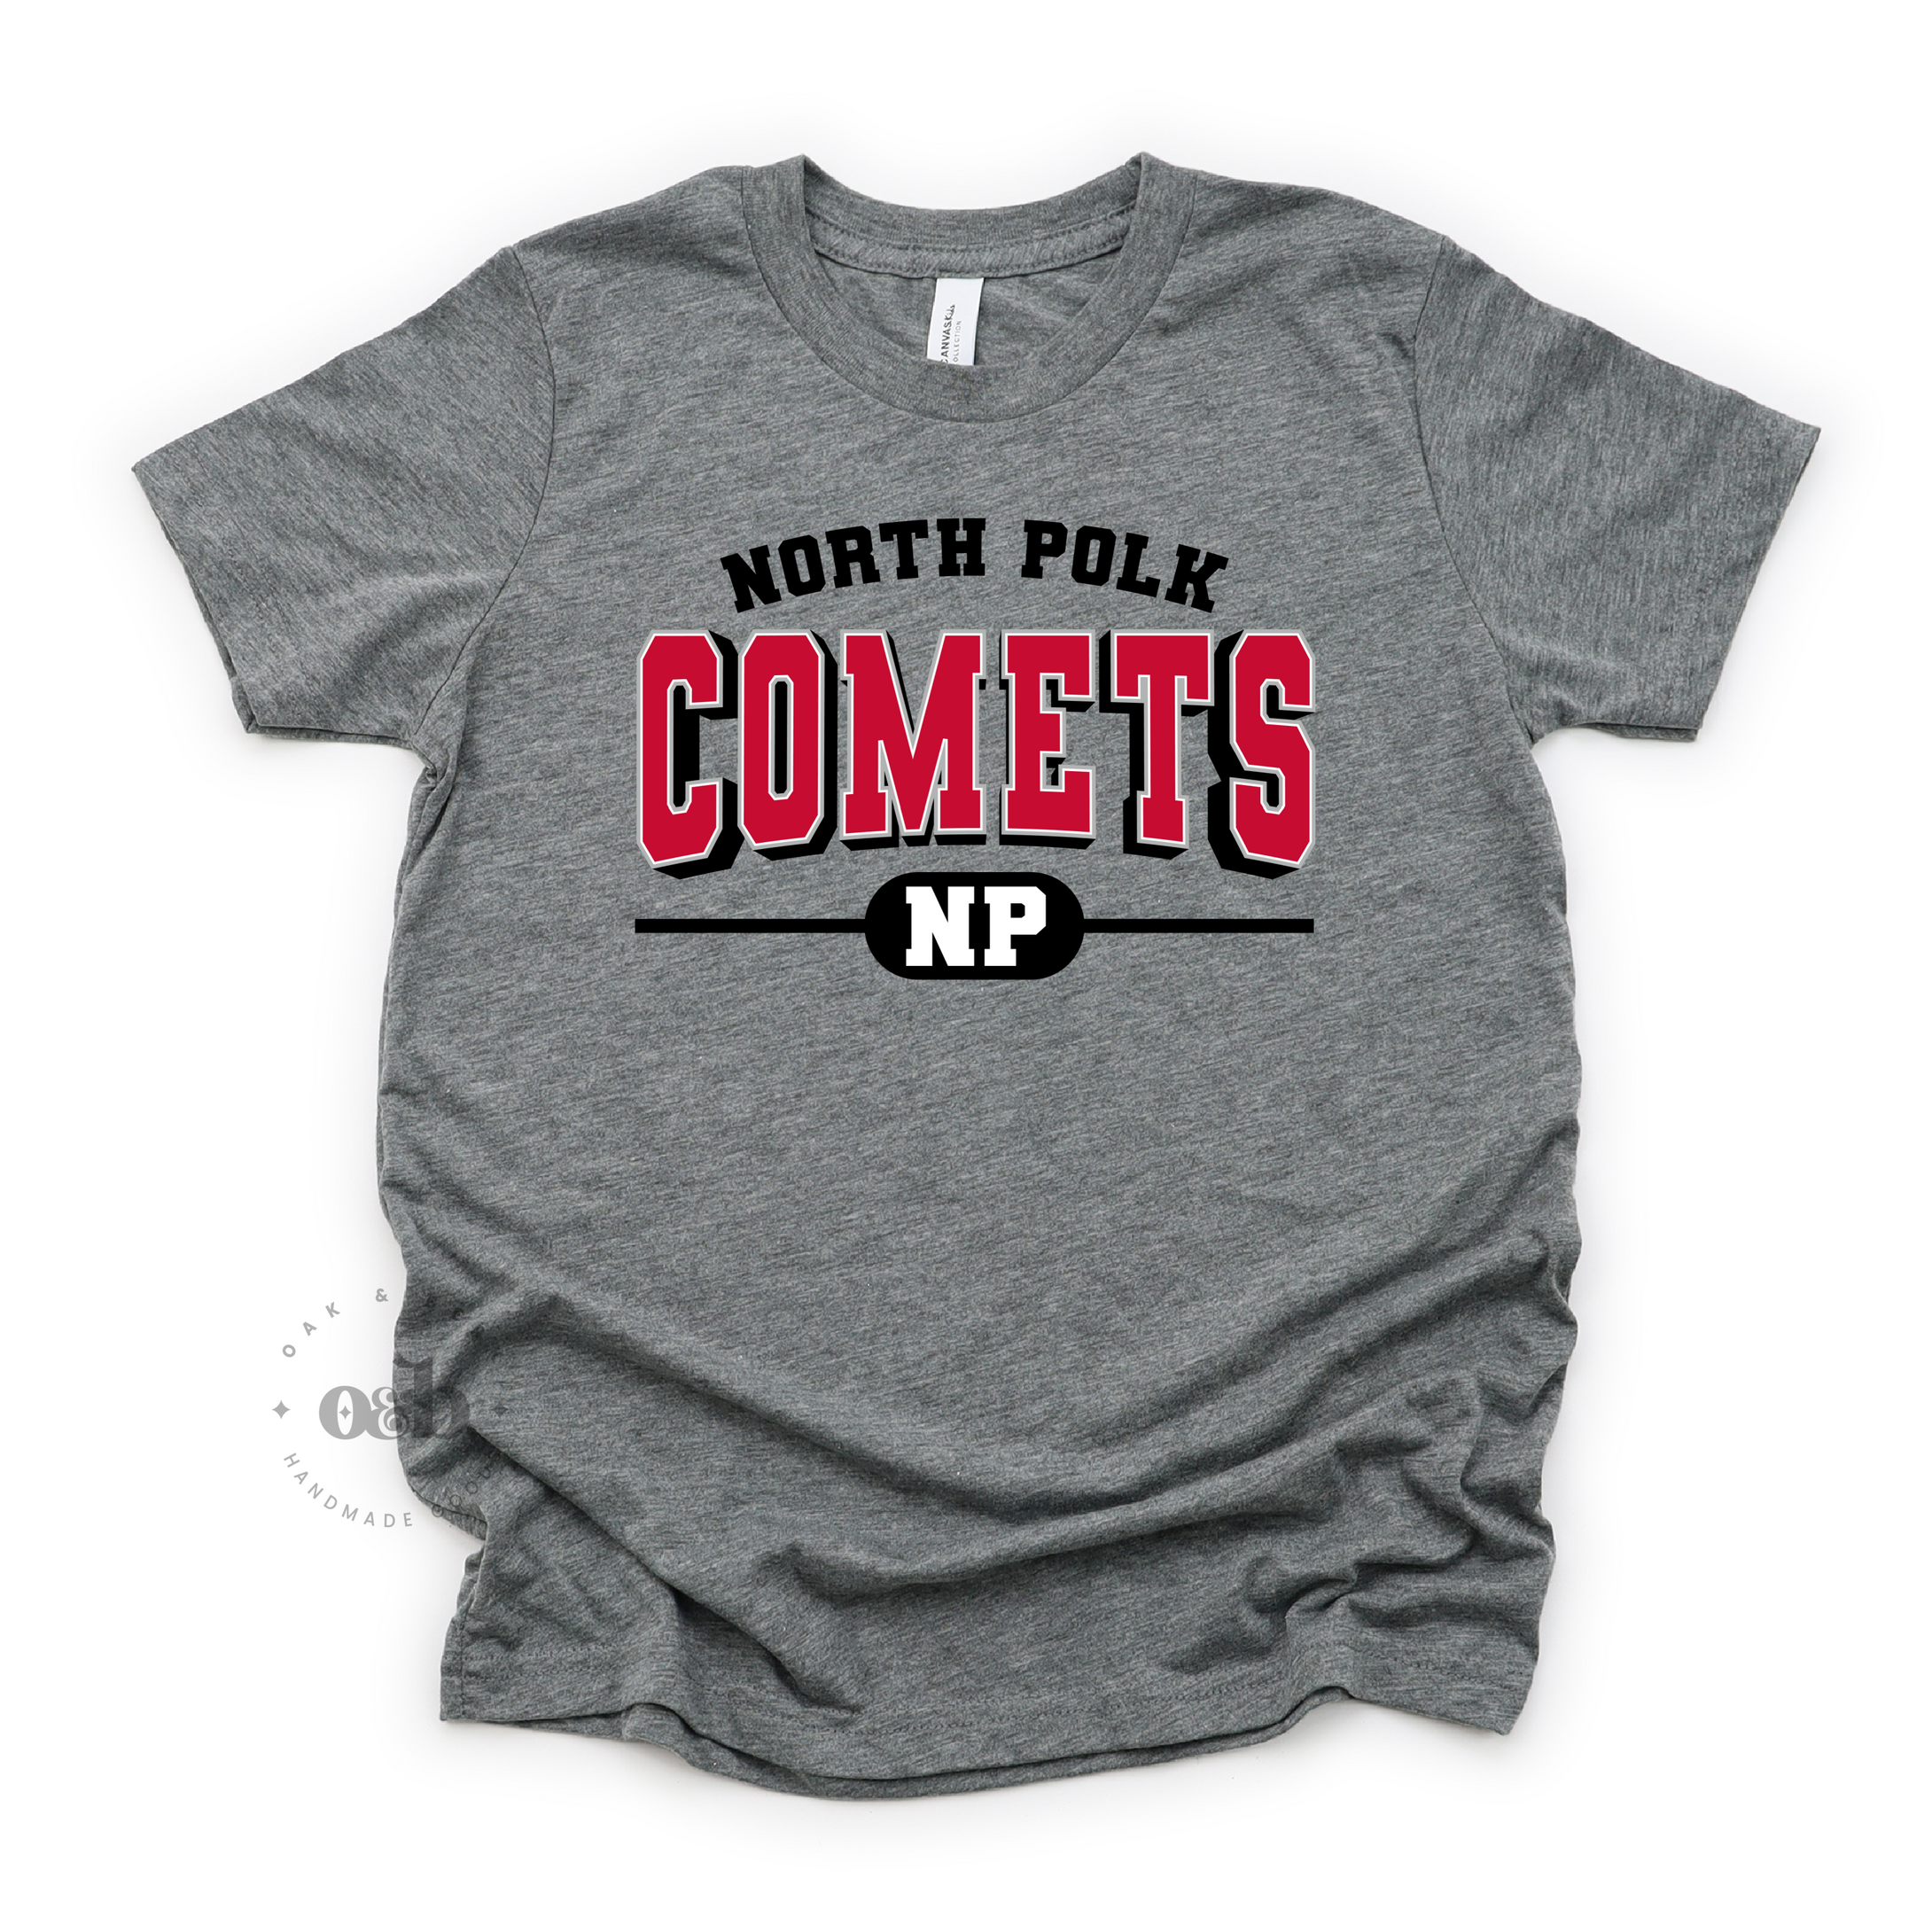 MTO / Varsity NP Comets, youth